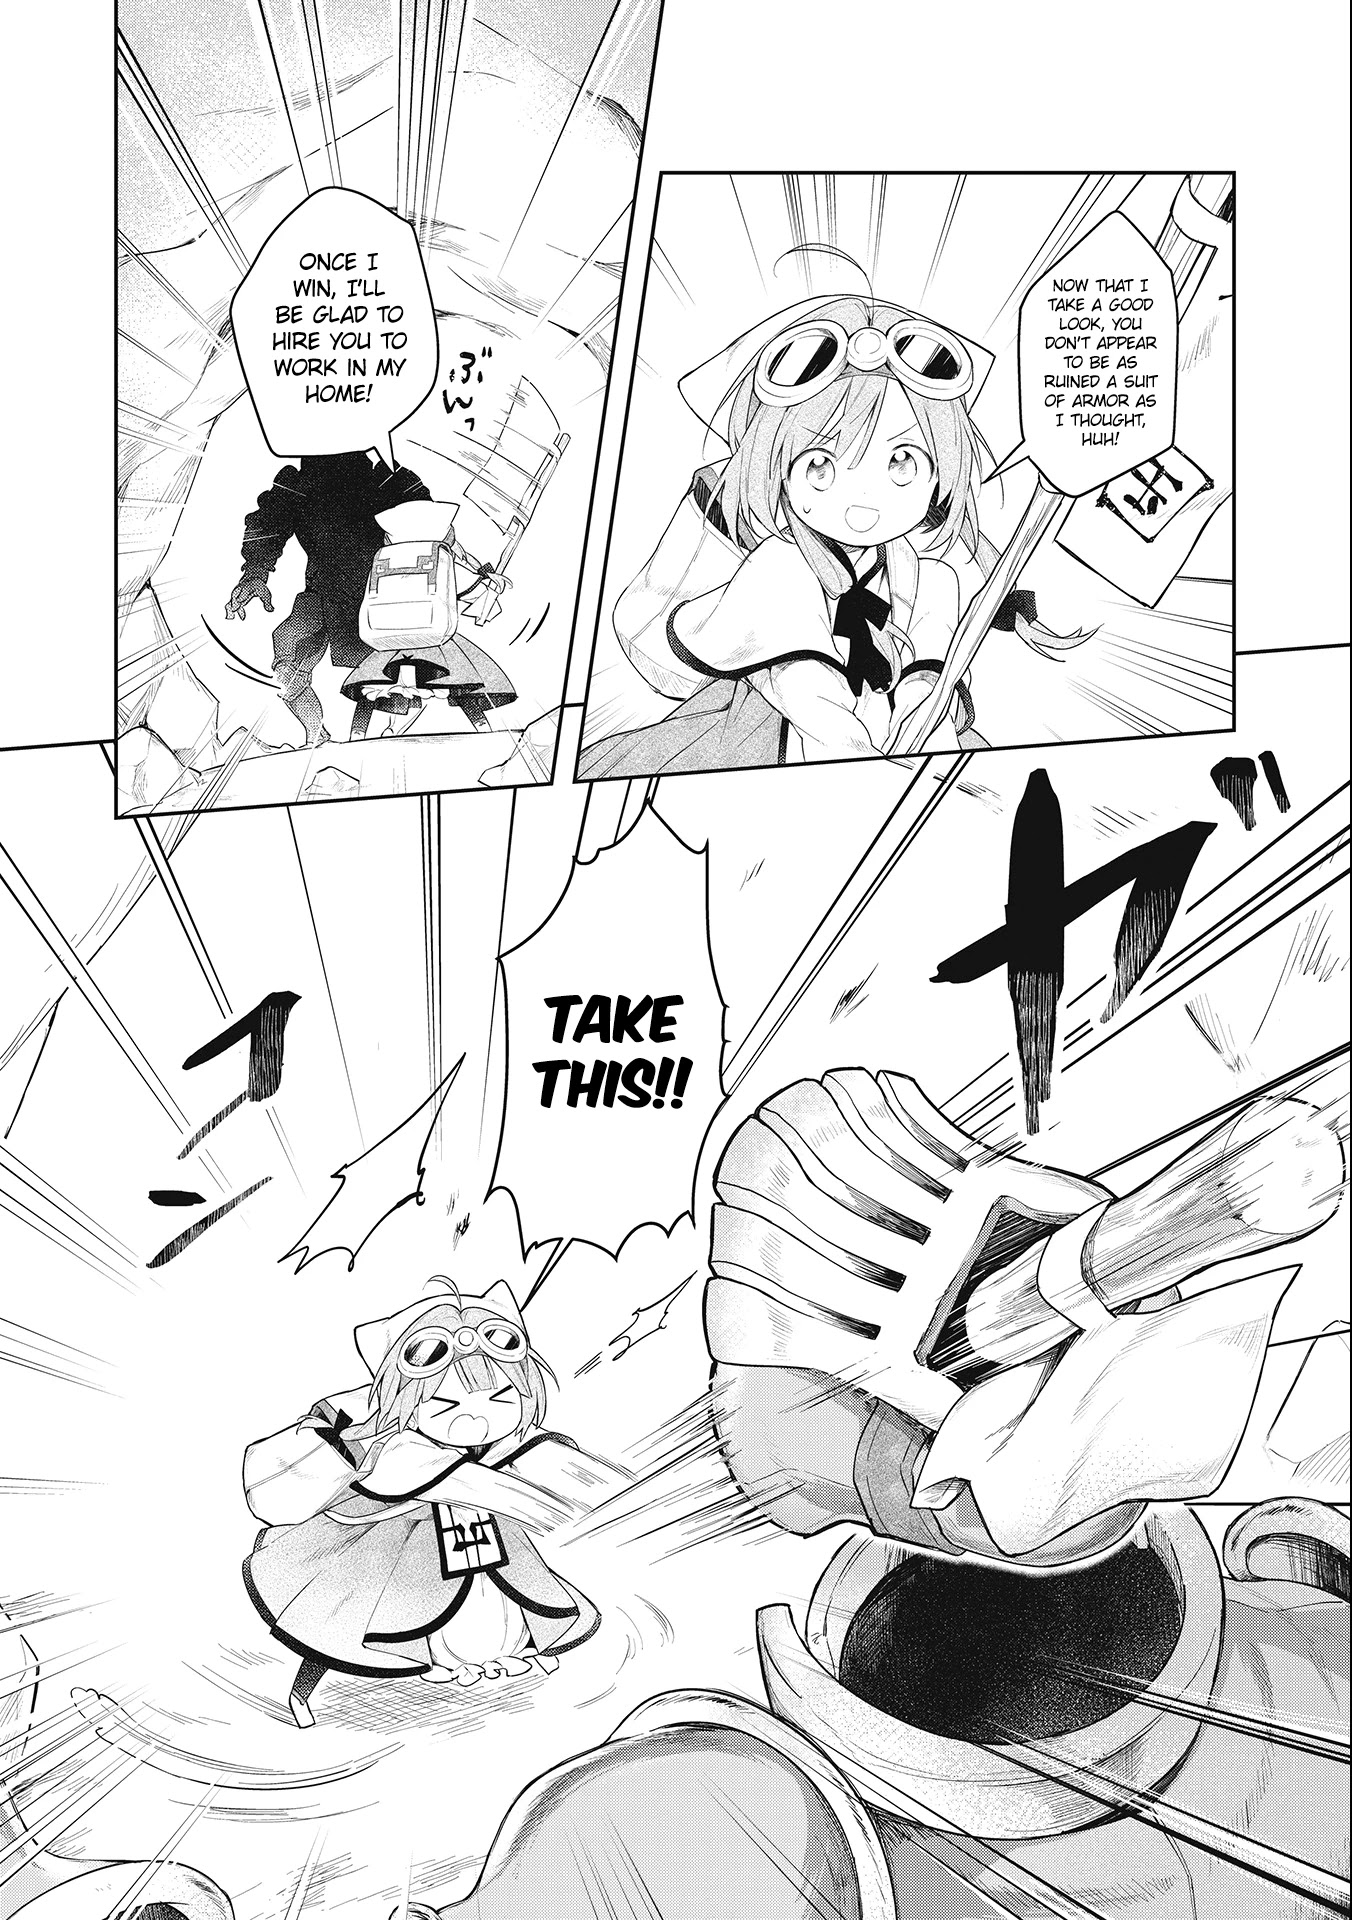 A Ruined Princess And Alternate World Hero Make A Great Country! - Page 2